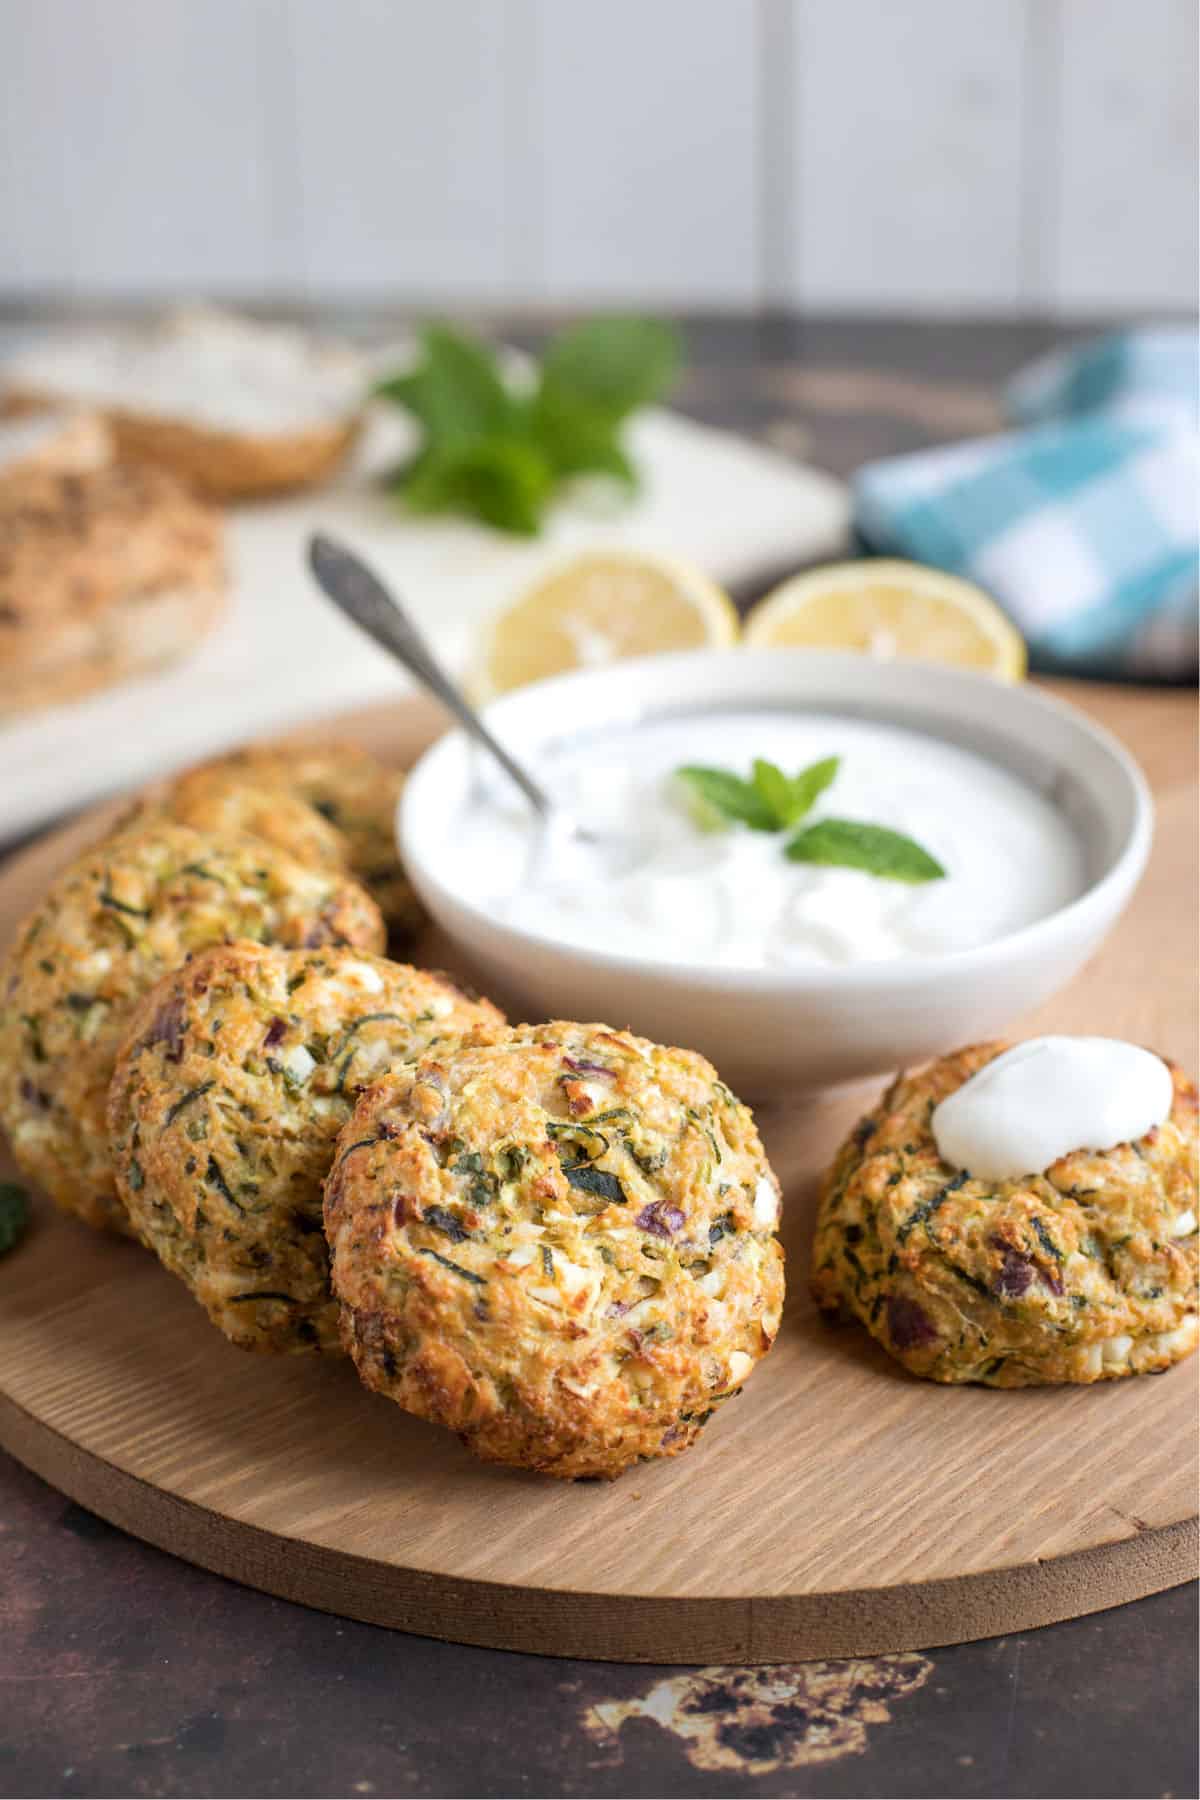 Courgette burgers on a serving platter with a bowl of tzatziki